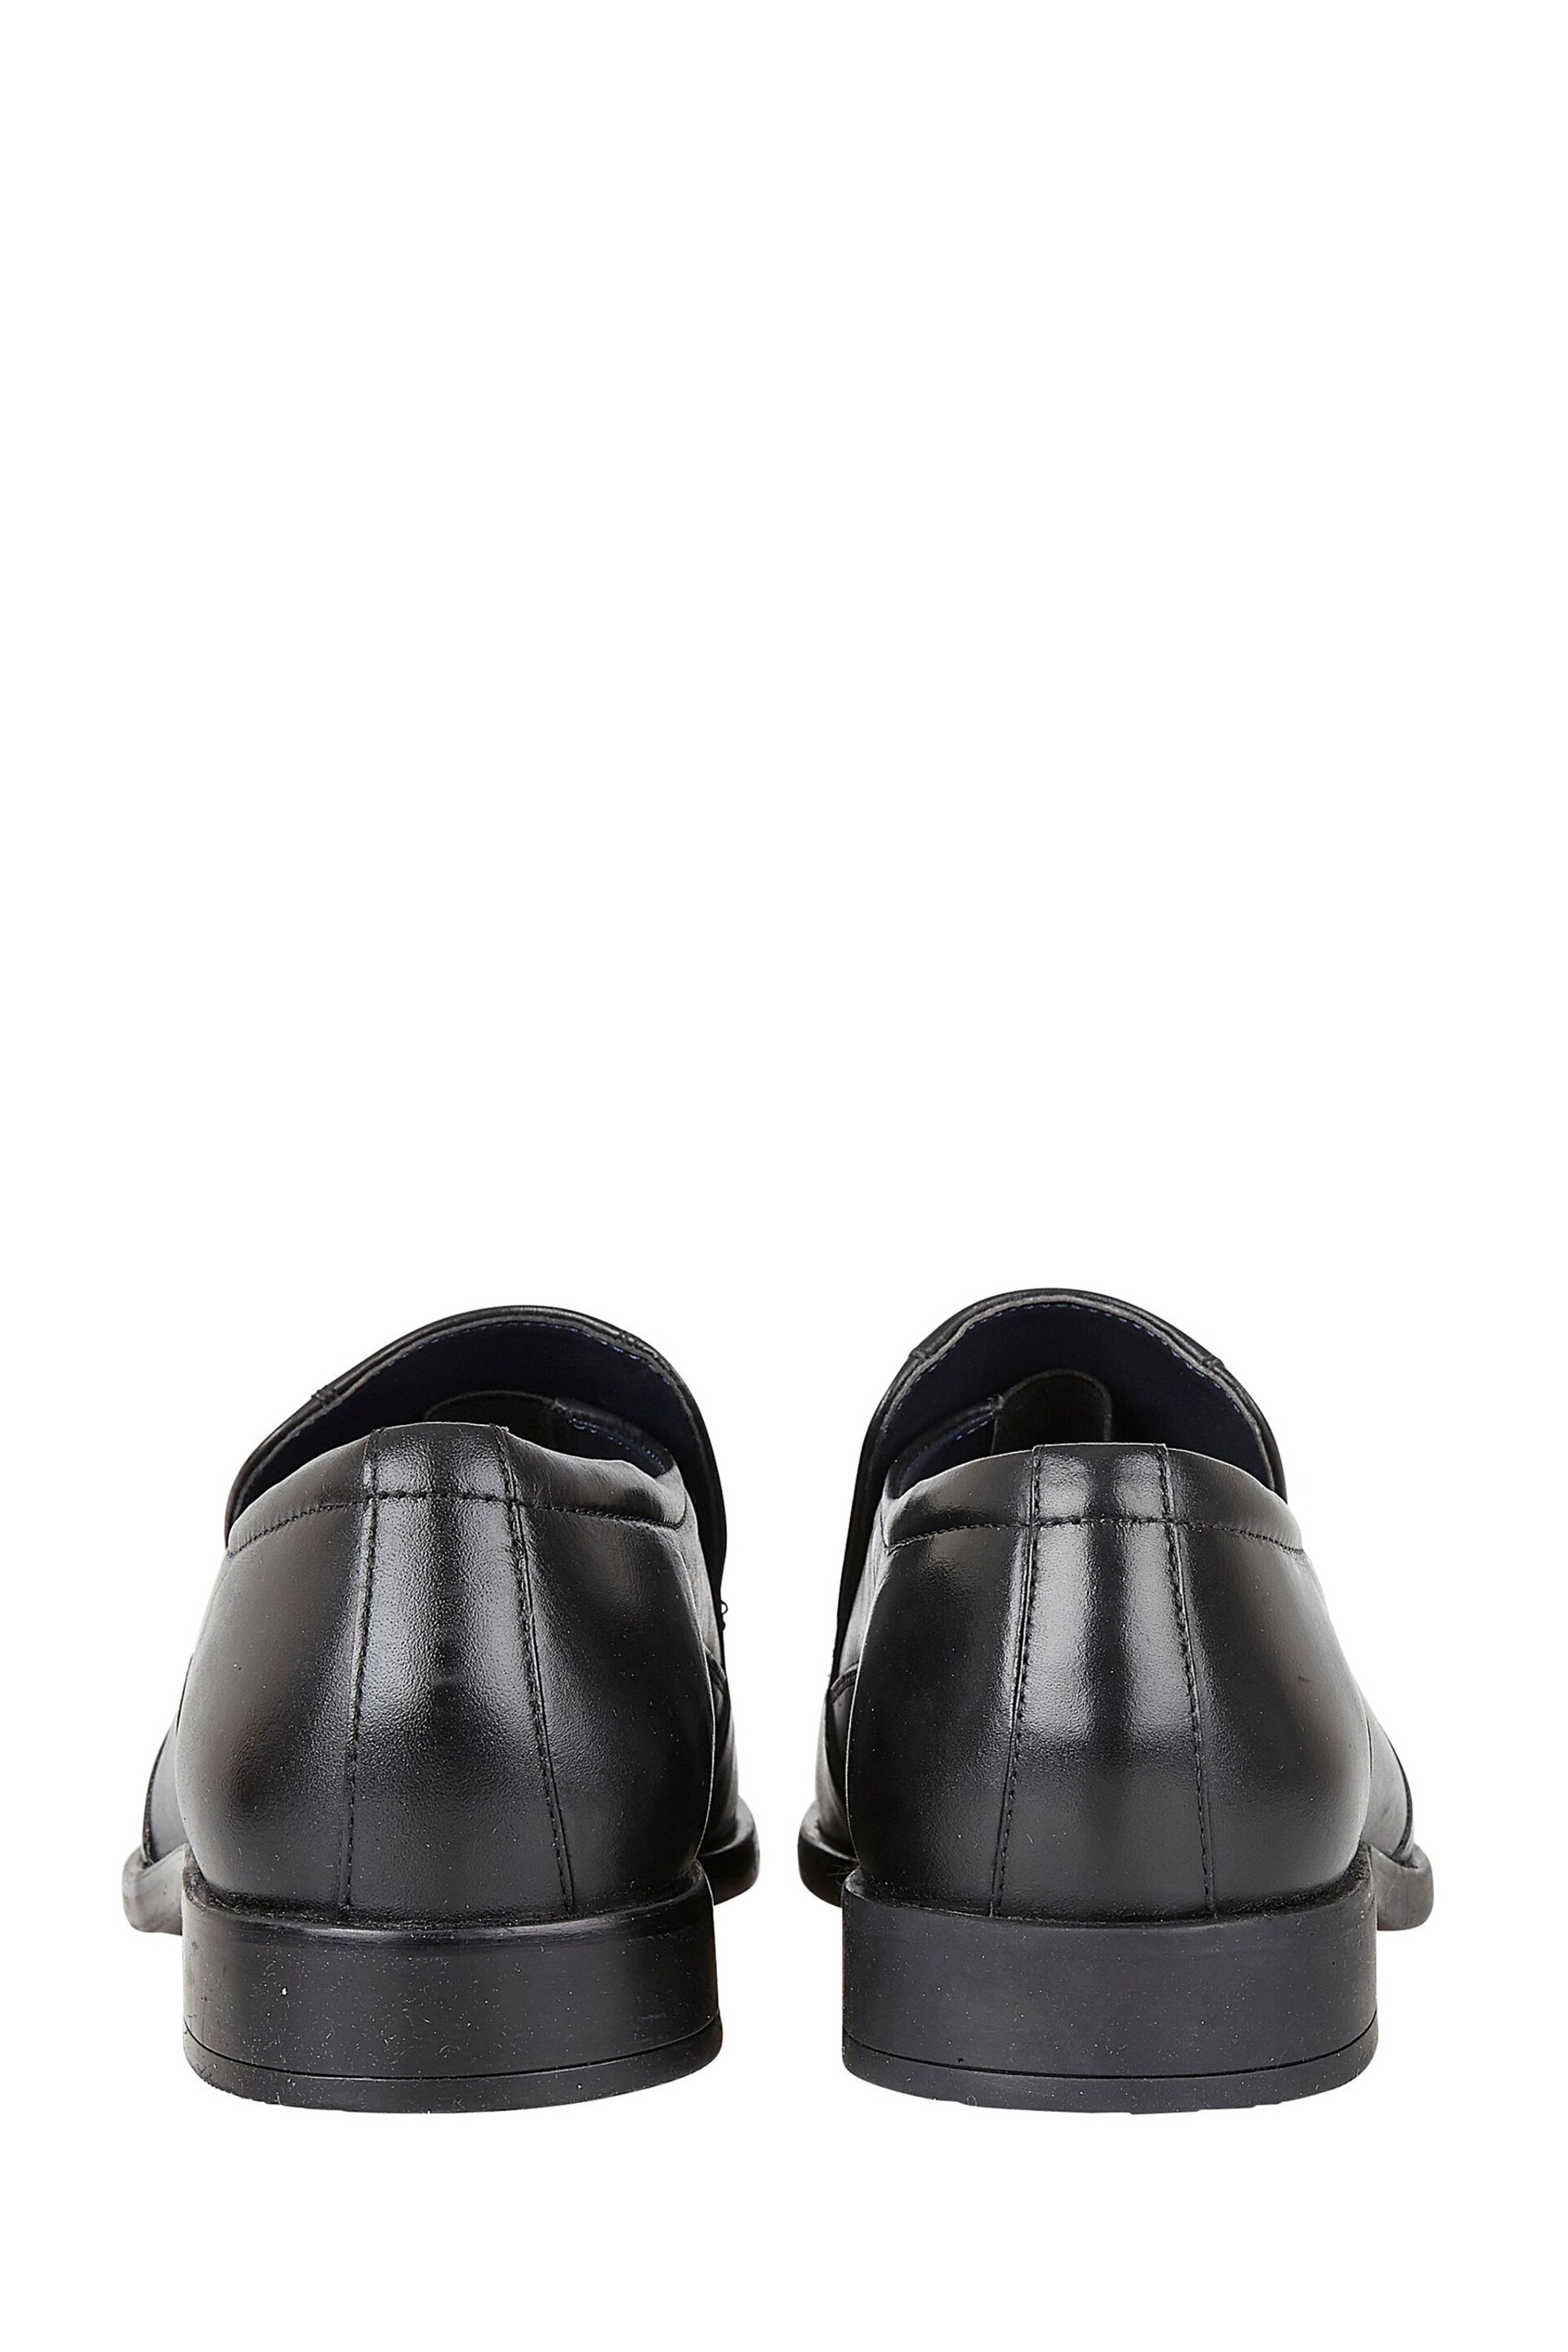 Lotus Black Leather Loafers - Image 4 of 5